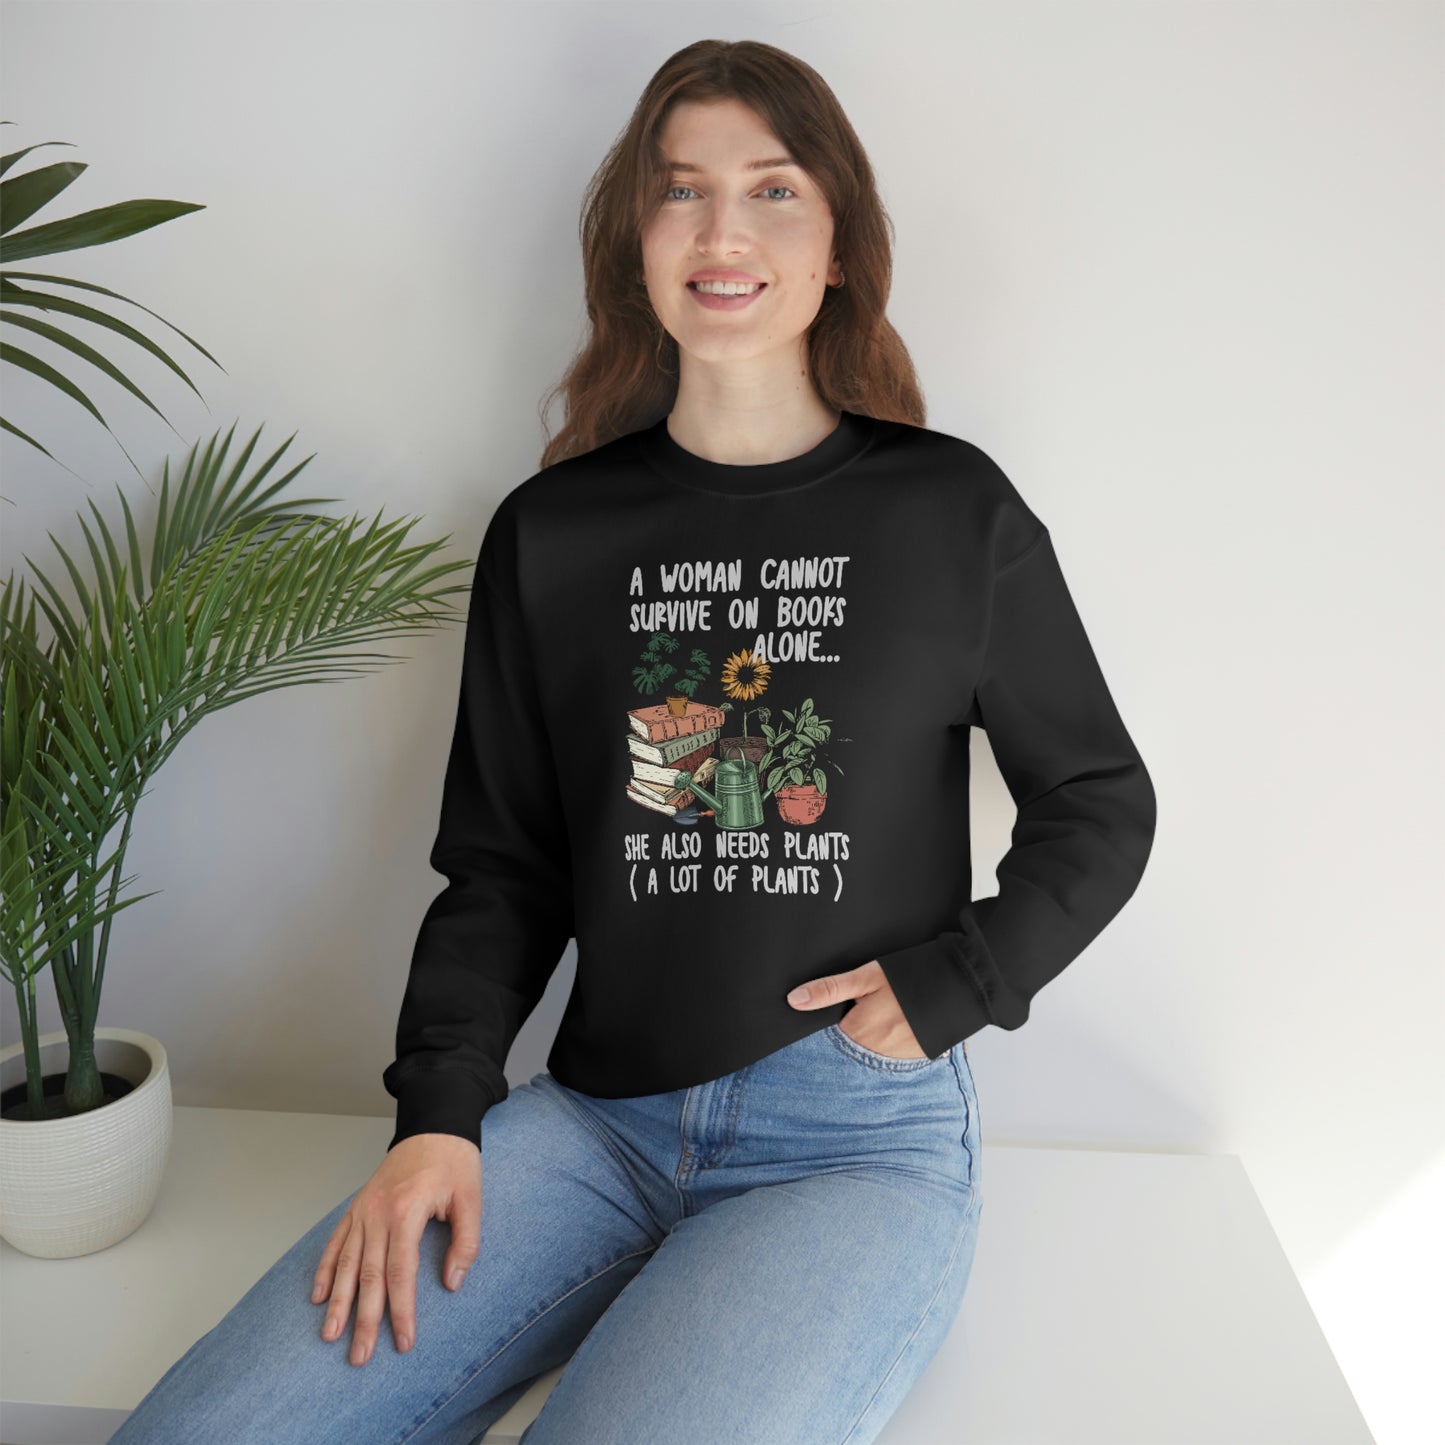 Books and plants Sweatshirt. Christmas gift for Bookworm and plant lady. Proud book lover and plant lover sweater